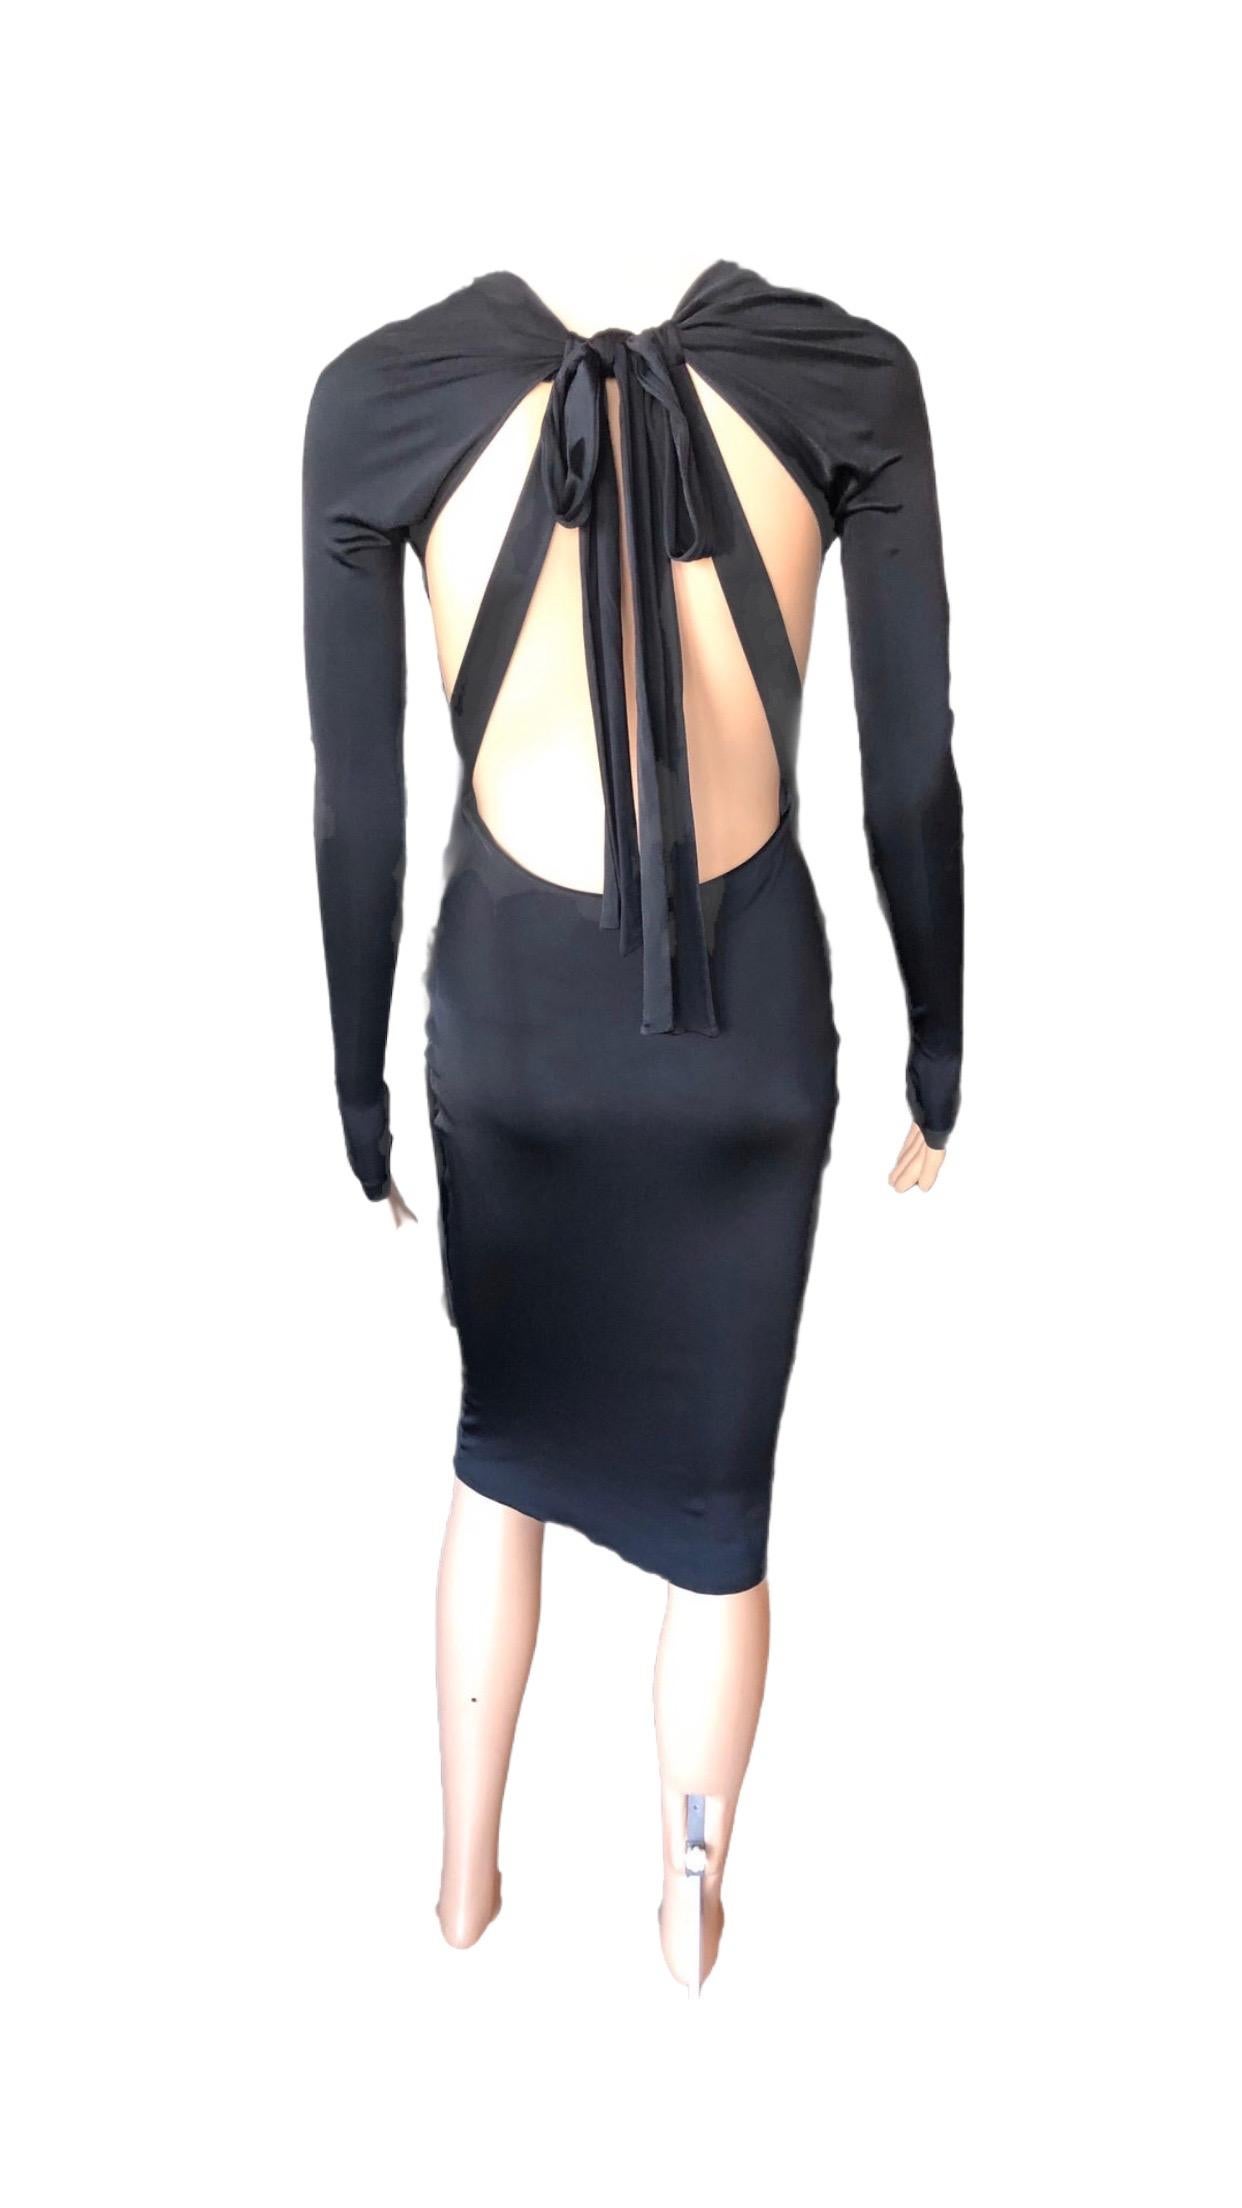 Gucci S/S 2005 Tom Ford Plunging Cutout Backless Bodycon Black Dress For Sale 7